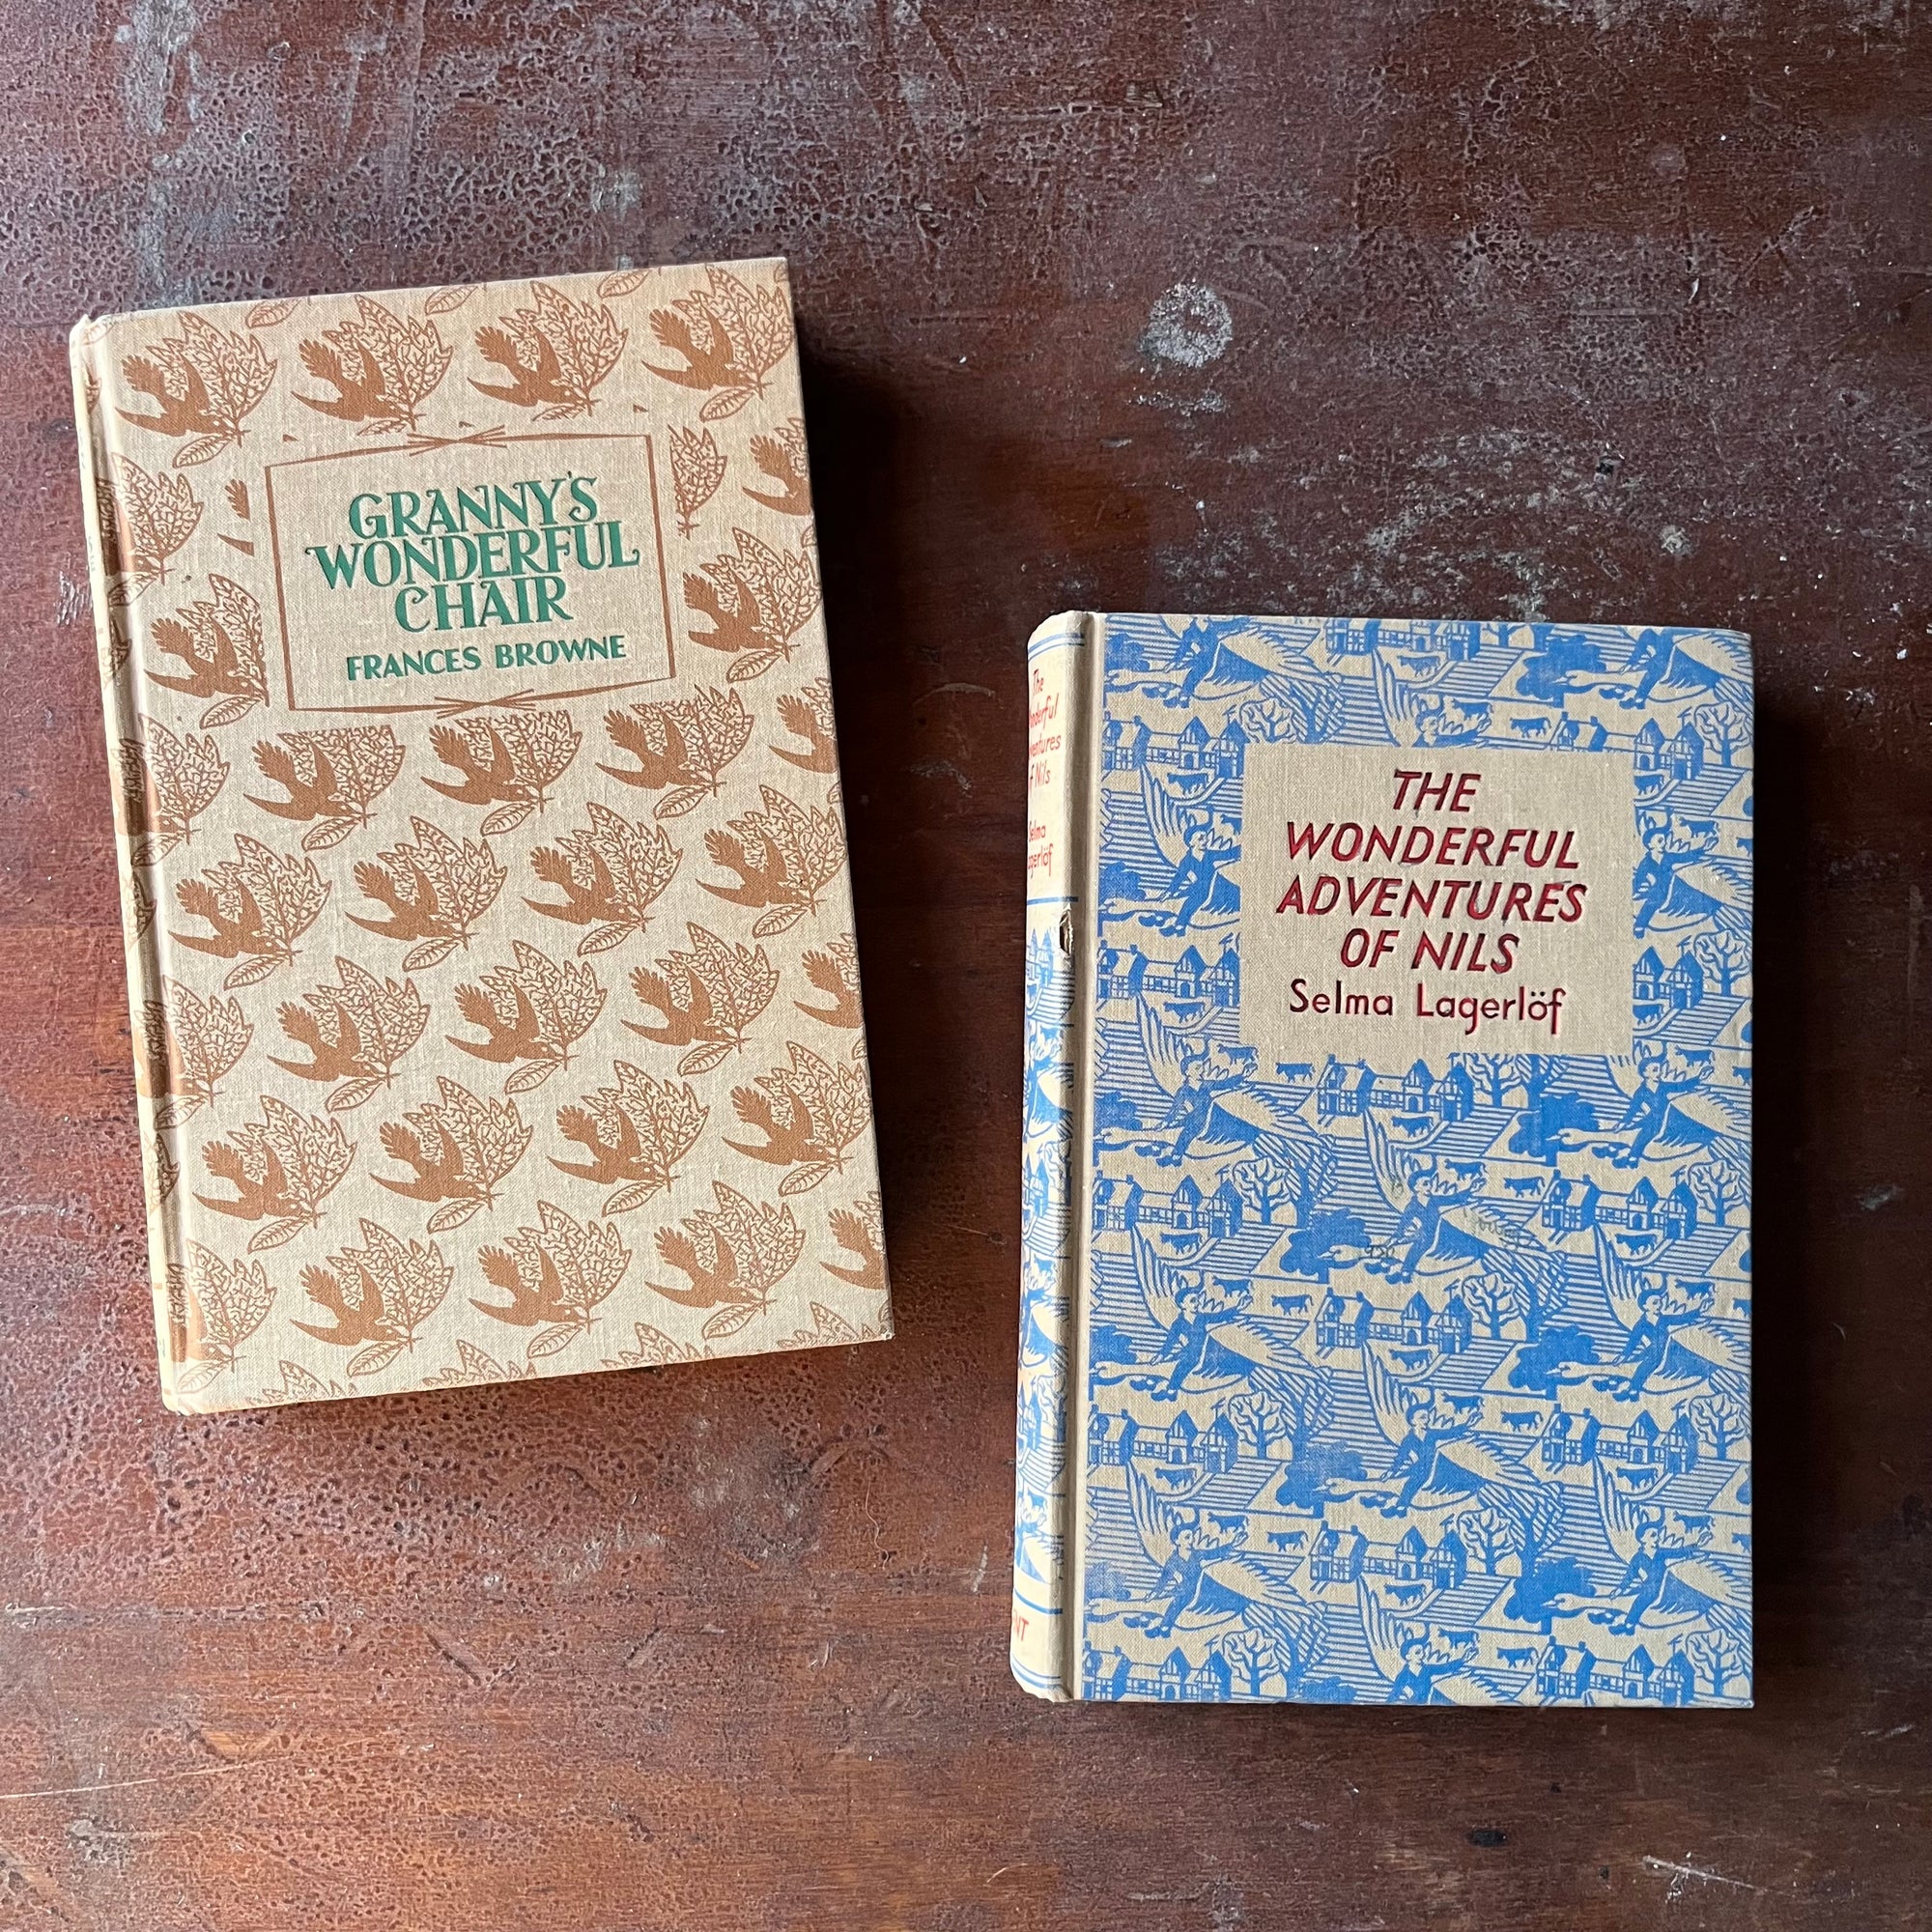 vintage children's chapter books - Dent Dutton Children's Illustrated Classics - The Wonderful Adventures of Nils written by Selma Lagerlof and Granny's Wonderful Chair written by Frances Browne - view of the decorative front covers in brown & blue